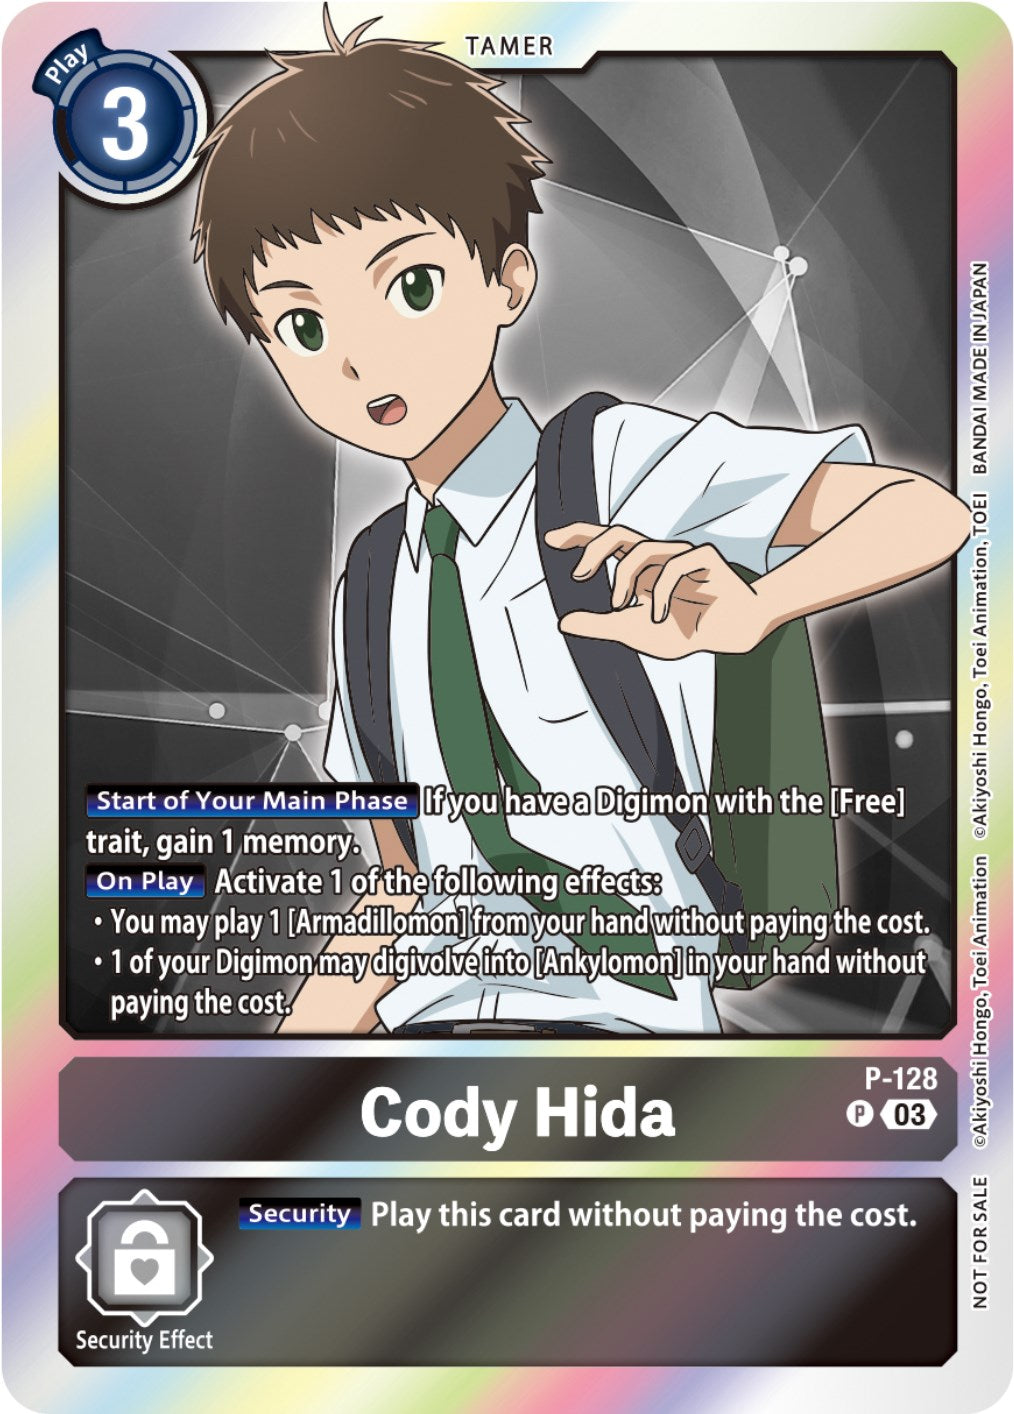 Cody Hida [P-128] (Tamer Party Pack -The Beginning- Ver. 2.0) [Promotional Cards] | Devastation Store